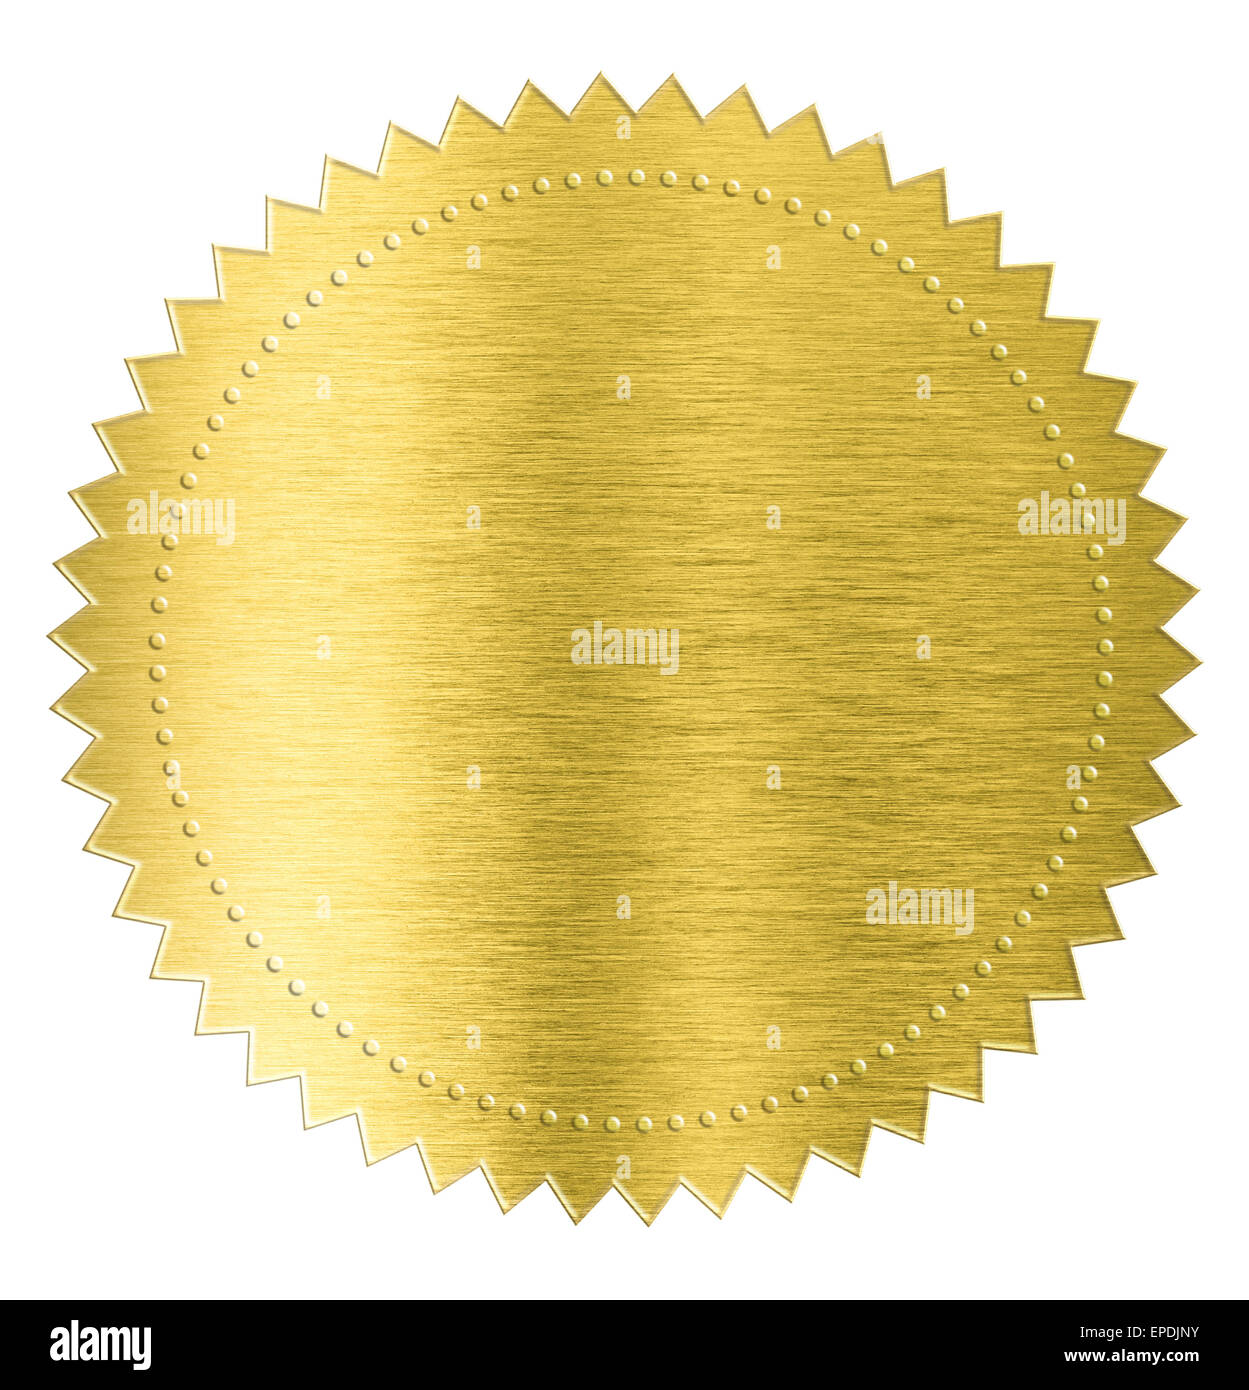 gold sticker seal label isolated with clipping path included Stock Photo